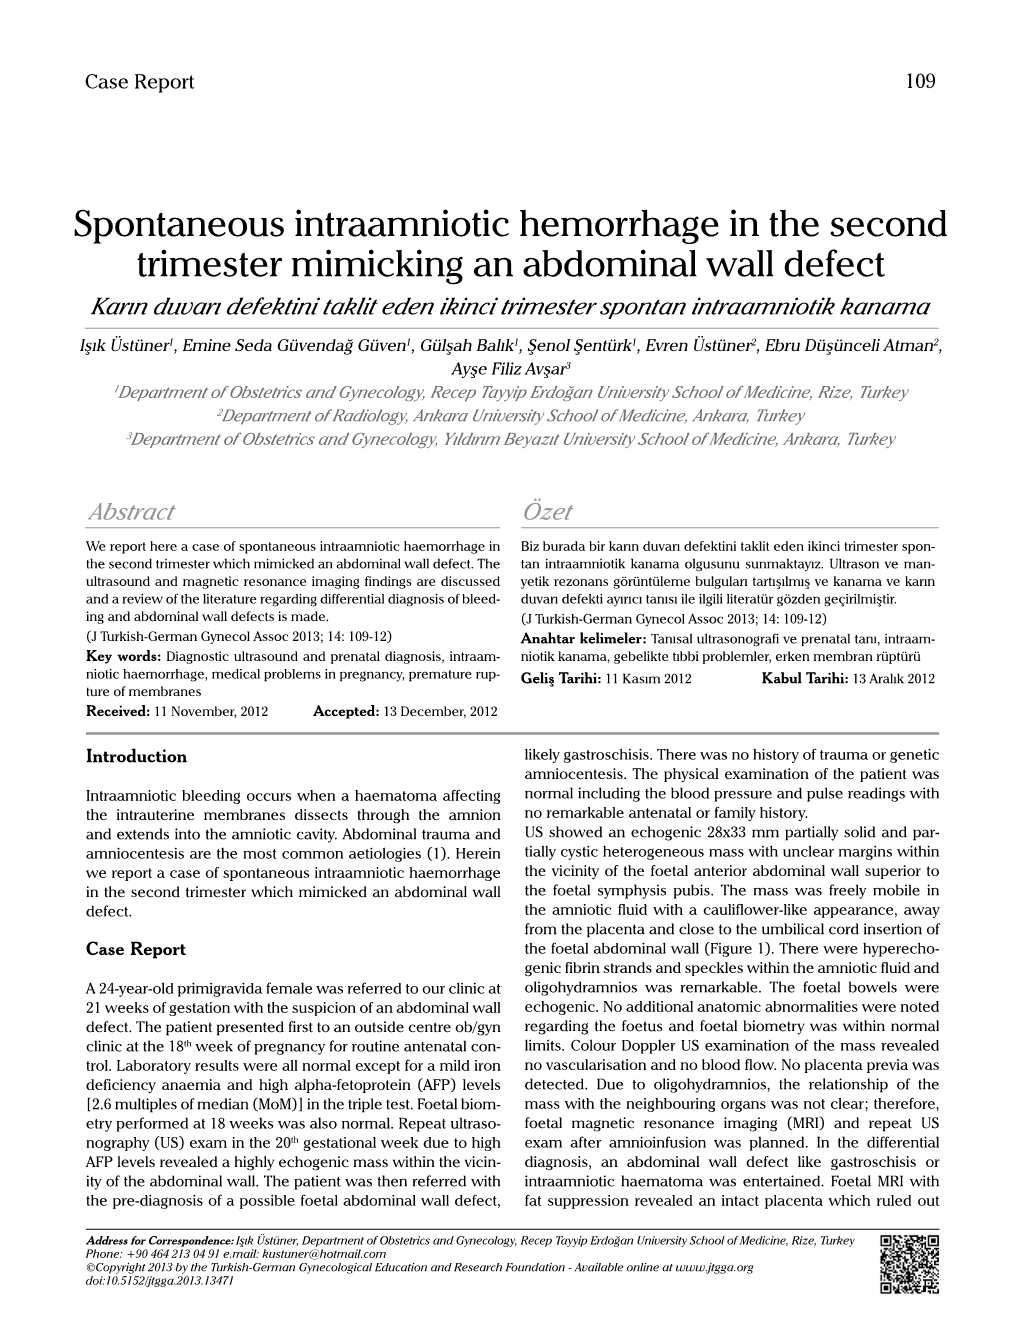 Spontaneous Intraamniotic Hemorrhage in the Second Trimester